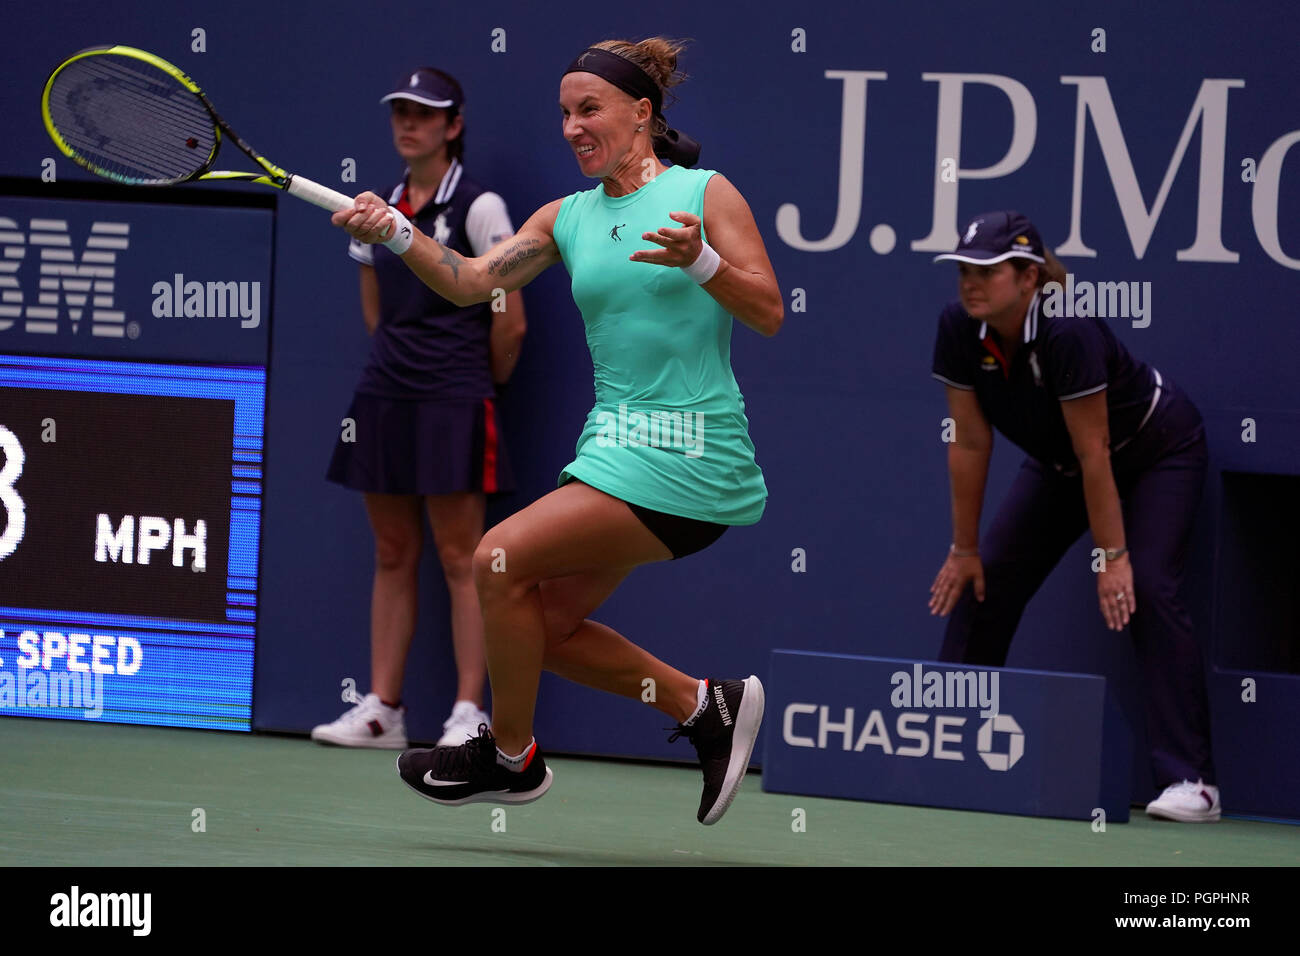 New York, United States. 27th Aug, 2018. Flushing Meadows, New York - August 27, 2018: US Open Tennis: Svetlana Kuznetsova of Russia in action during her first round match against Venus Williams of the United States on opening day at the US Open in Flushing Meadows, New York. Williams won the match in three sets to advance to the second round. Credit: Adam Stoltman/Alamy Live News Stock Photo